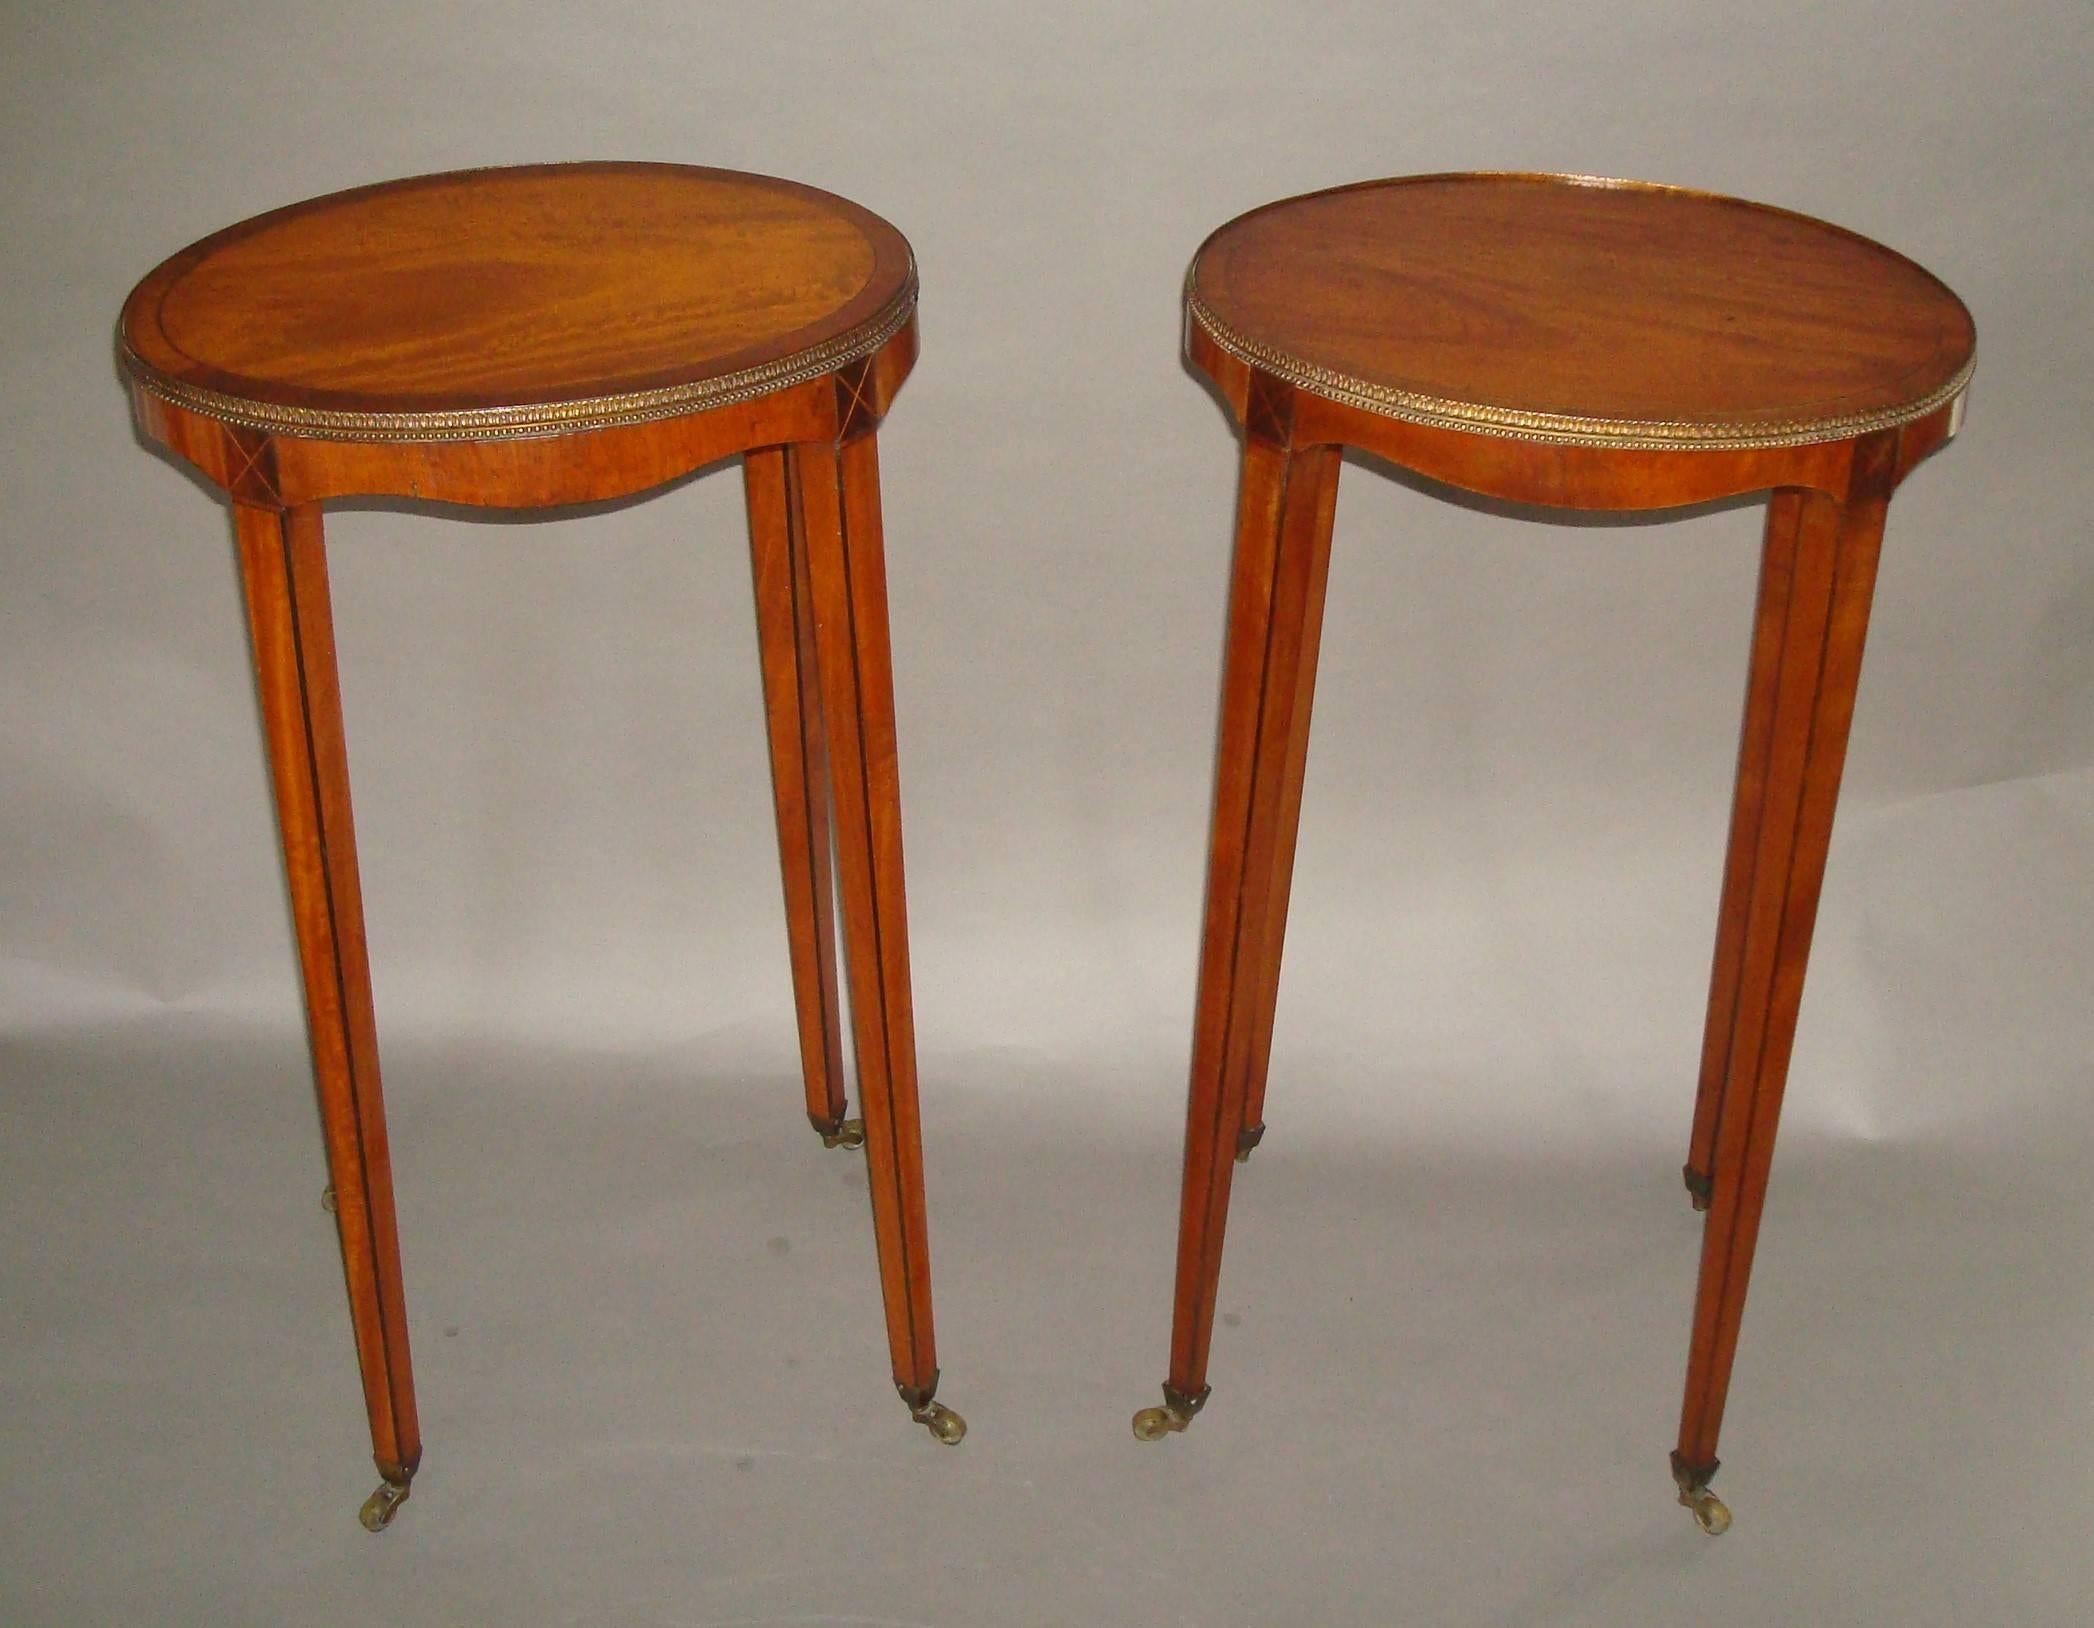 An elegant George III matched pair of satinwood urn stands; the figured oval tops with ebony and boxwood stringing crossbanded in tulipwood, surrounded by gilded brass bead and foliate design moulding, above a shallow swept apron raised on square